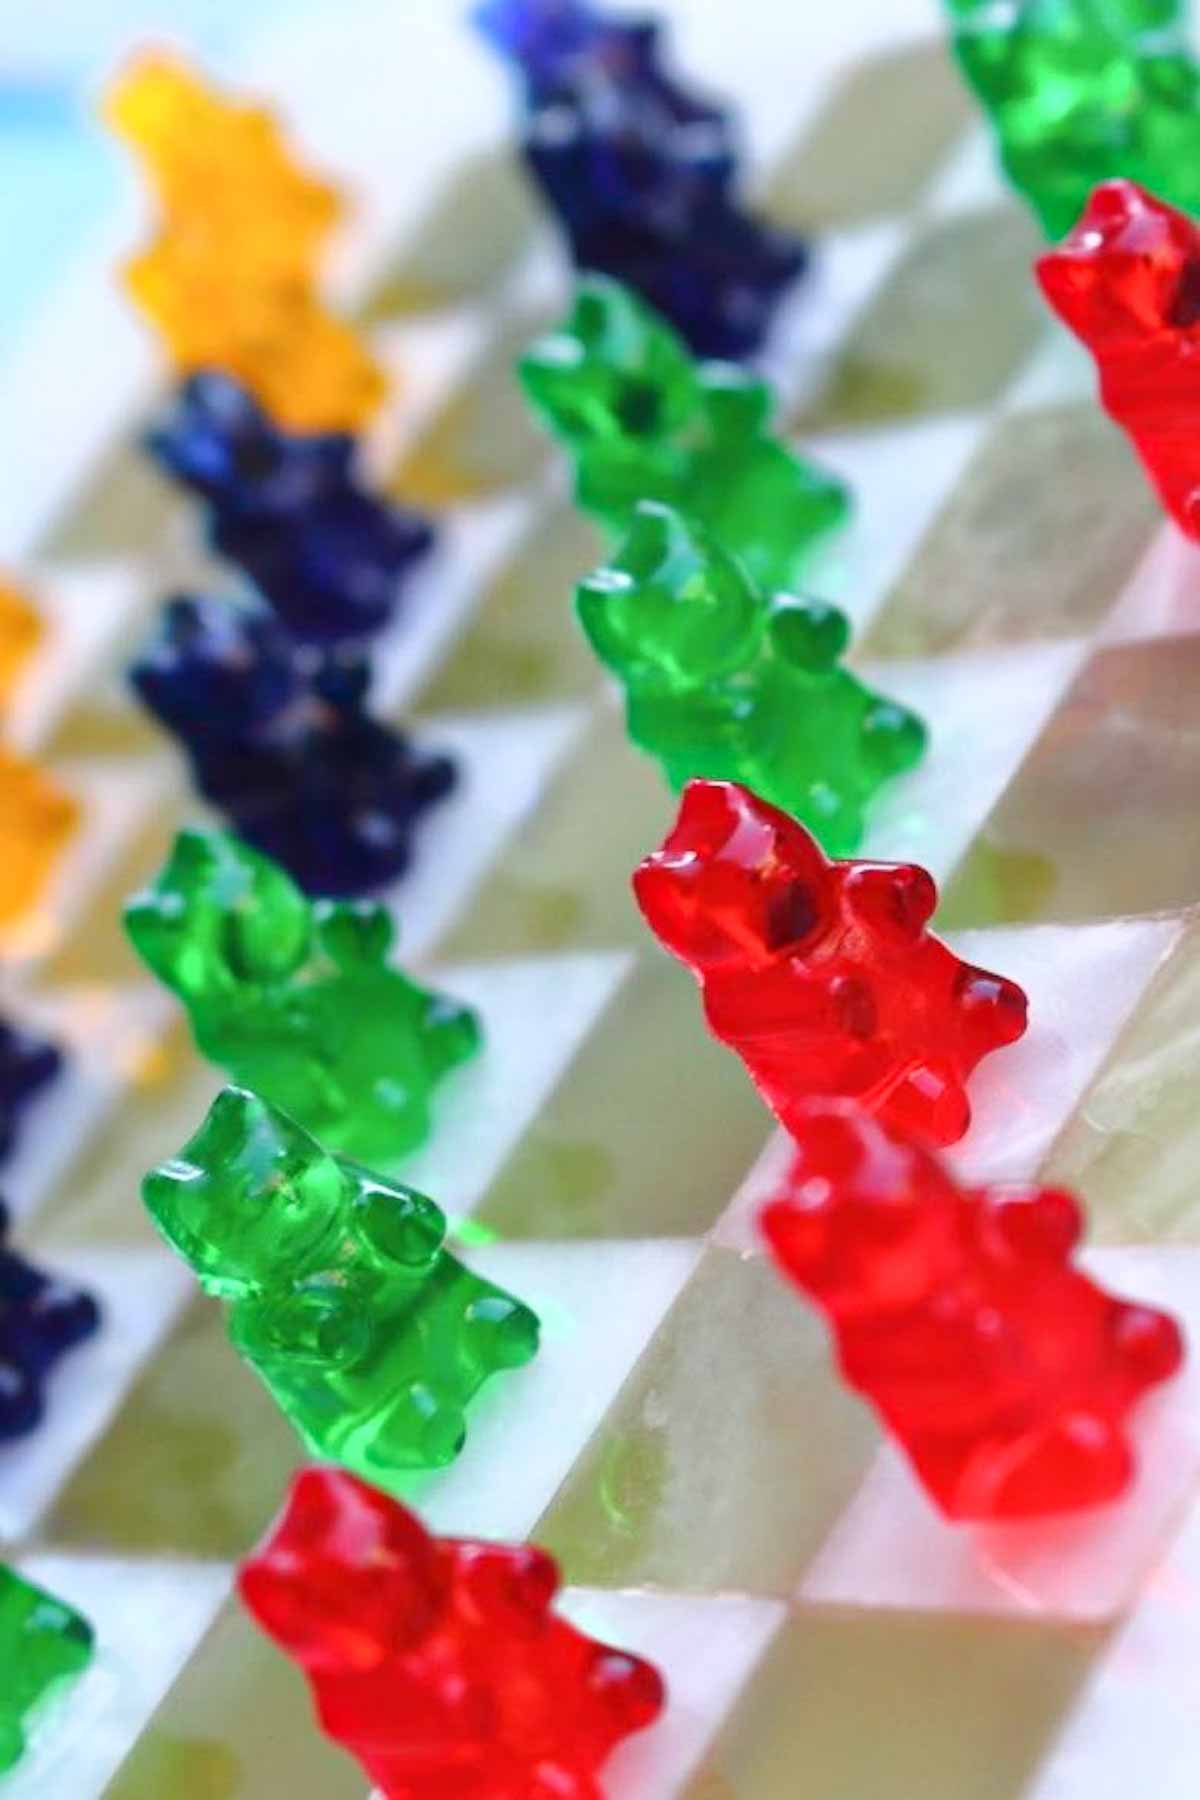 colorful gummy bears standing on a checkered board.